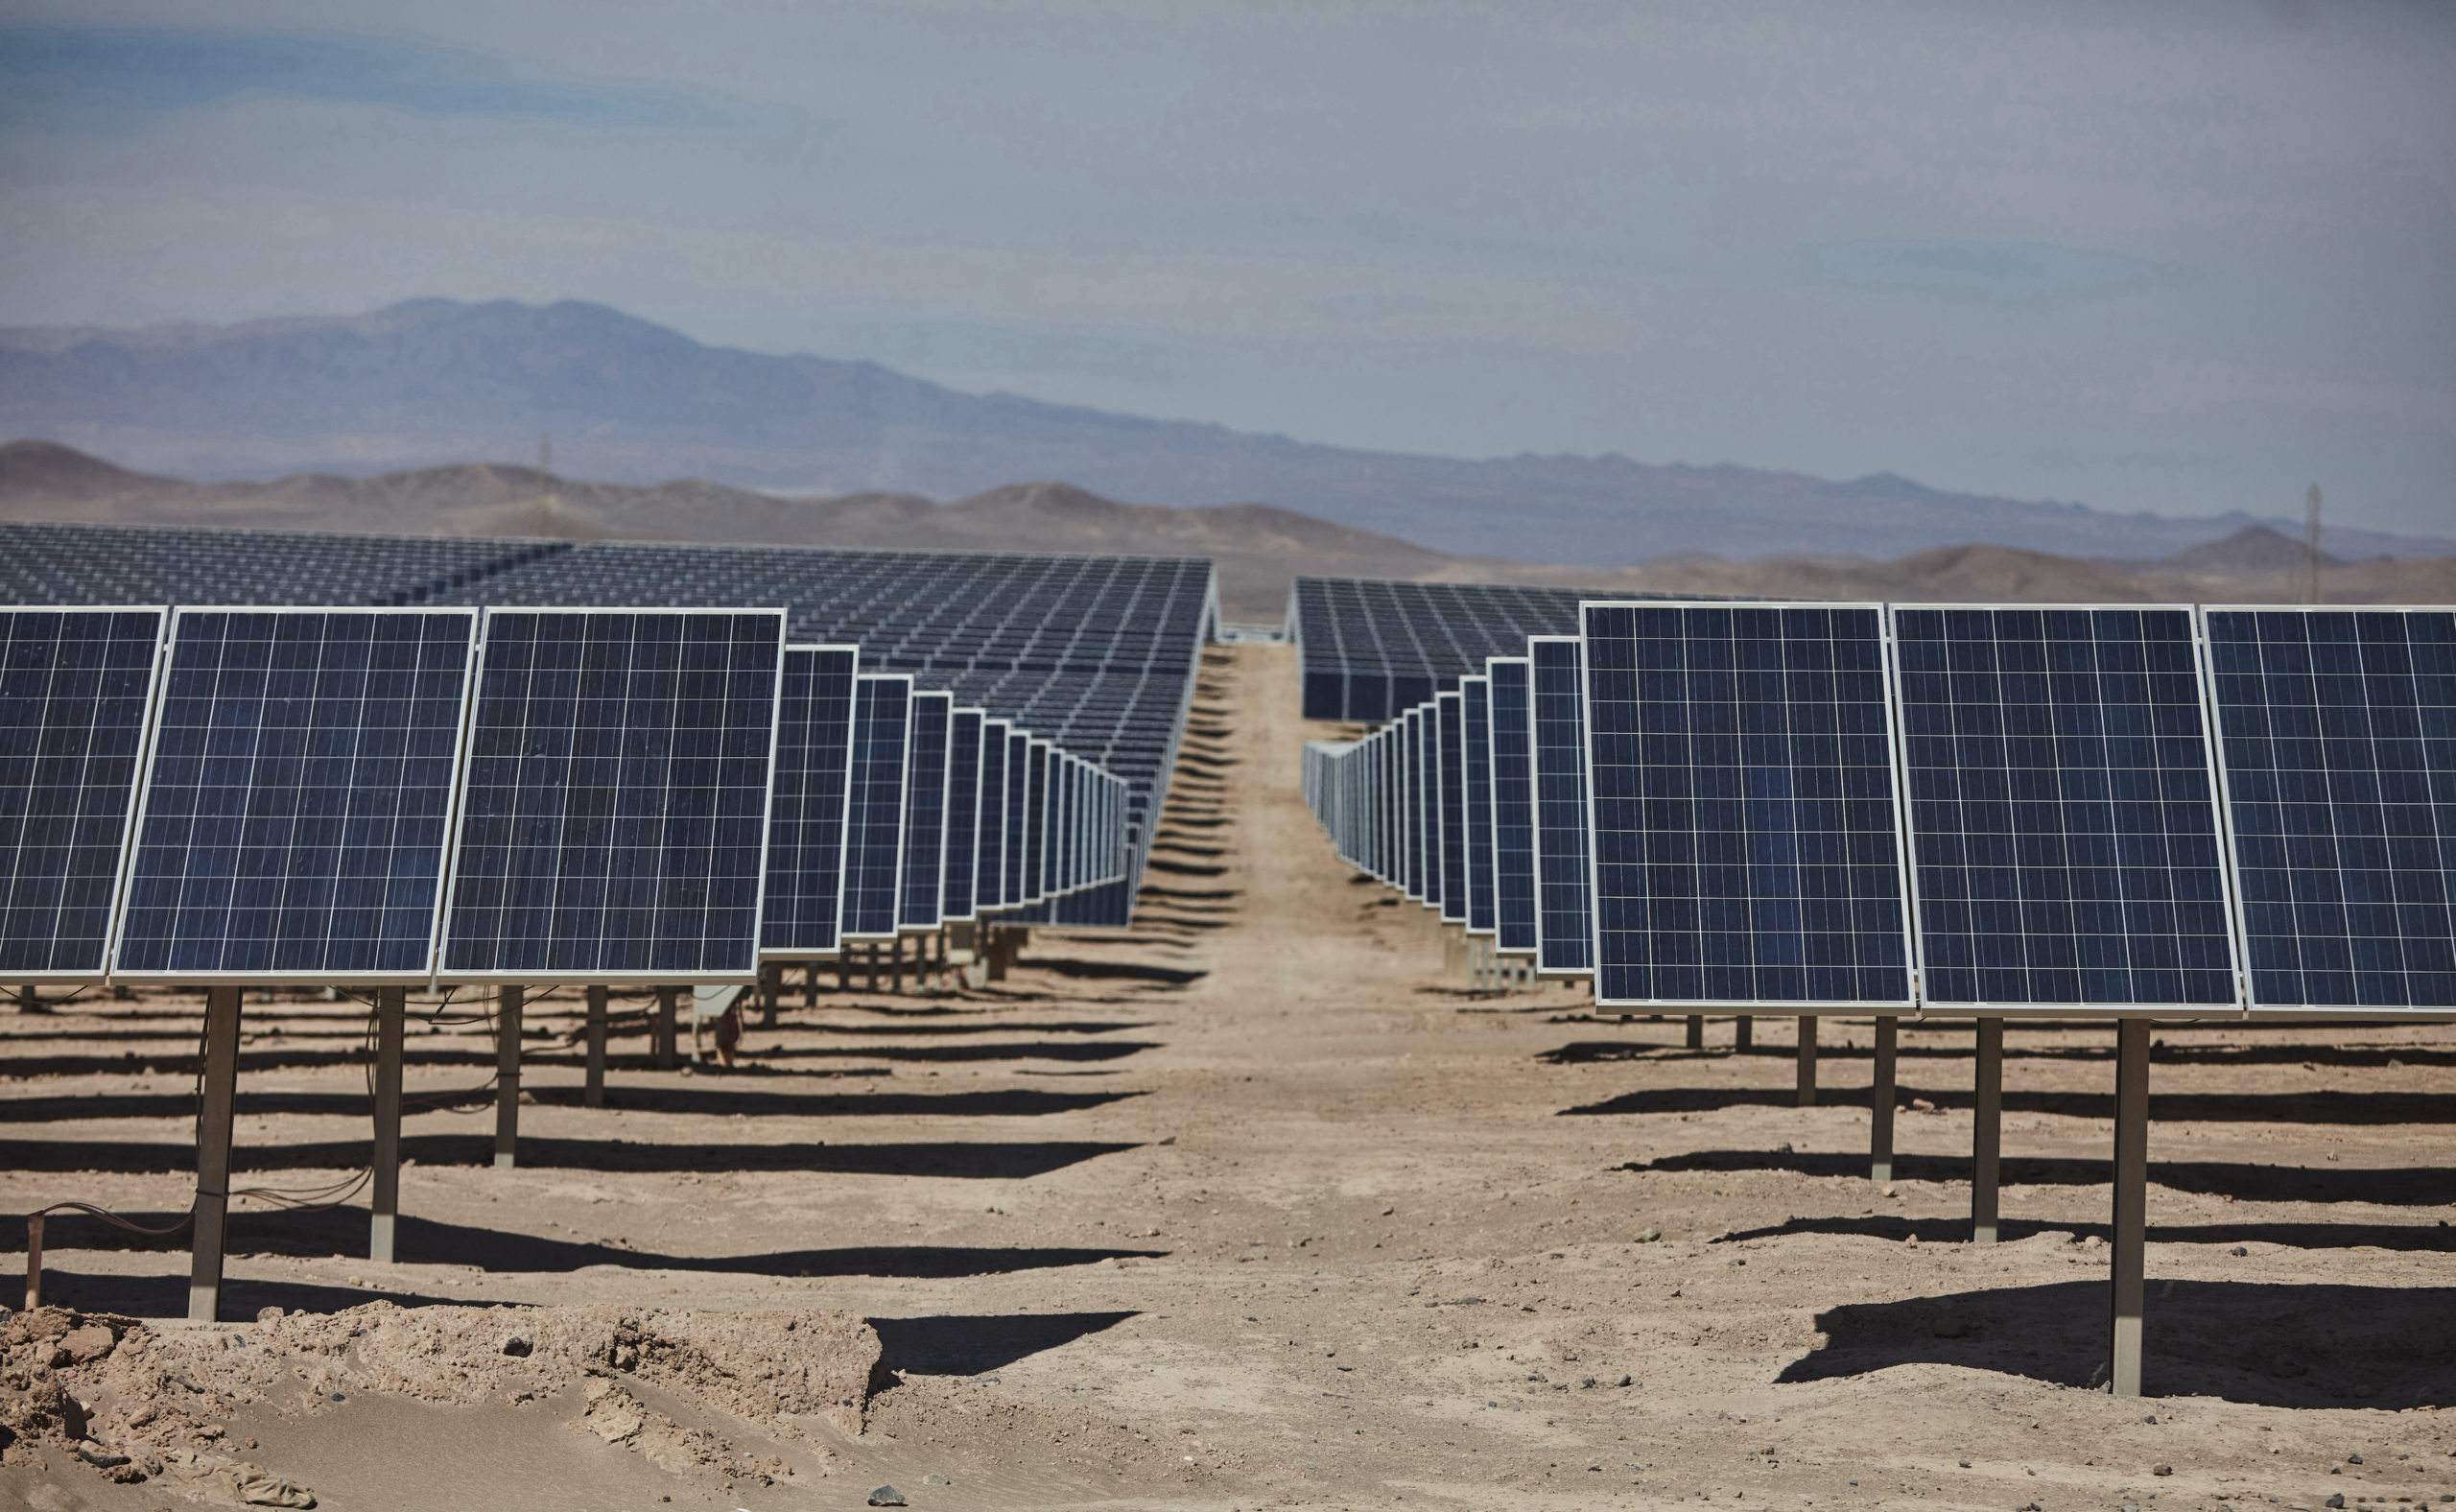 Pampa Union Photovoltaic Project of Cerro Dominador Group Receives Environmental Approval to Increase Generating Capacity To 600 MW